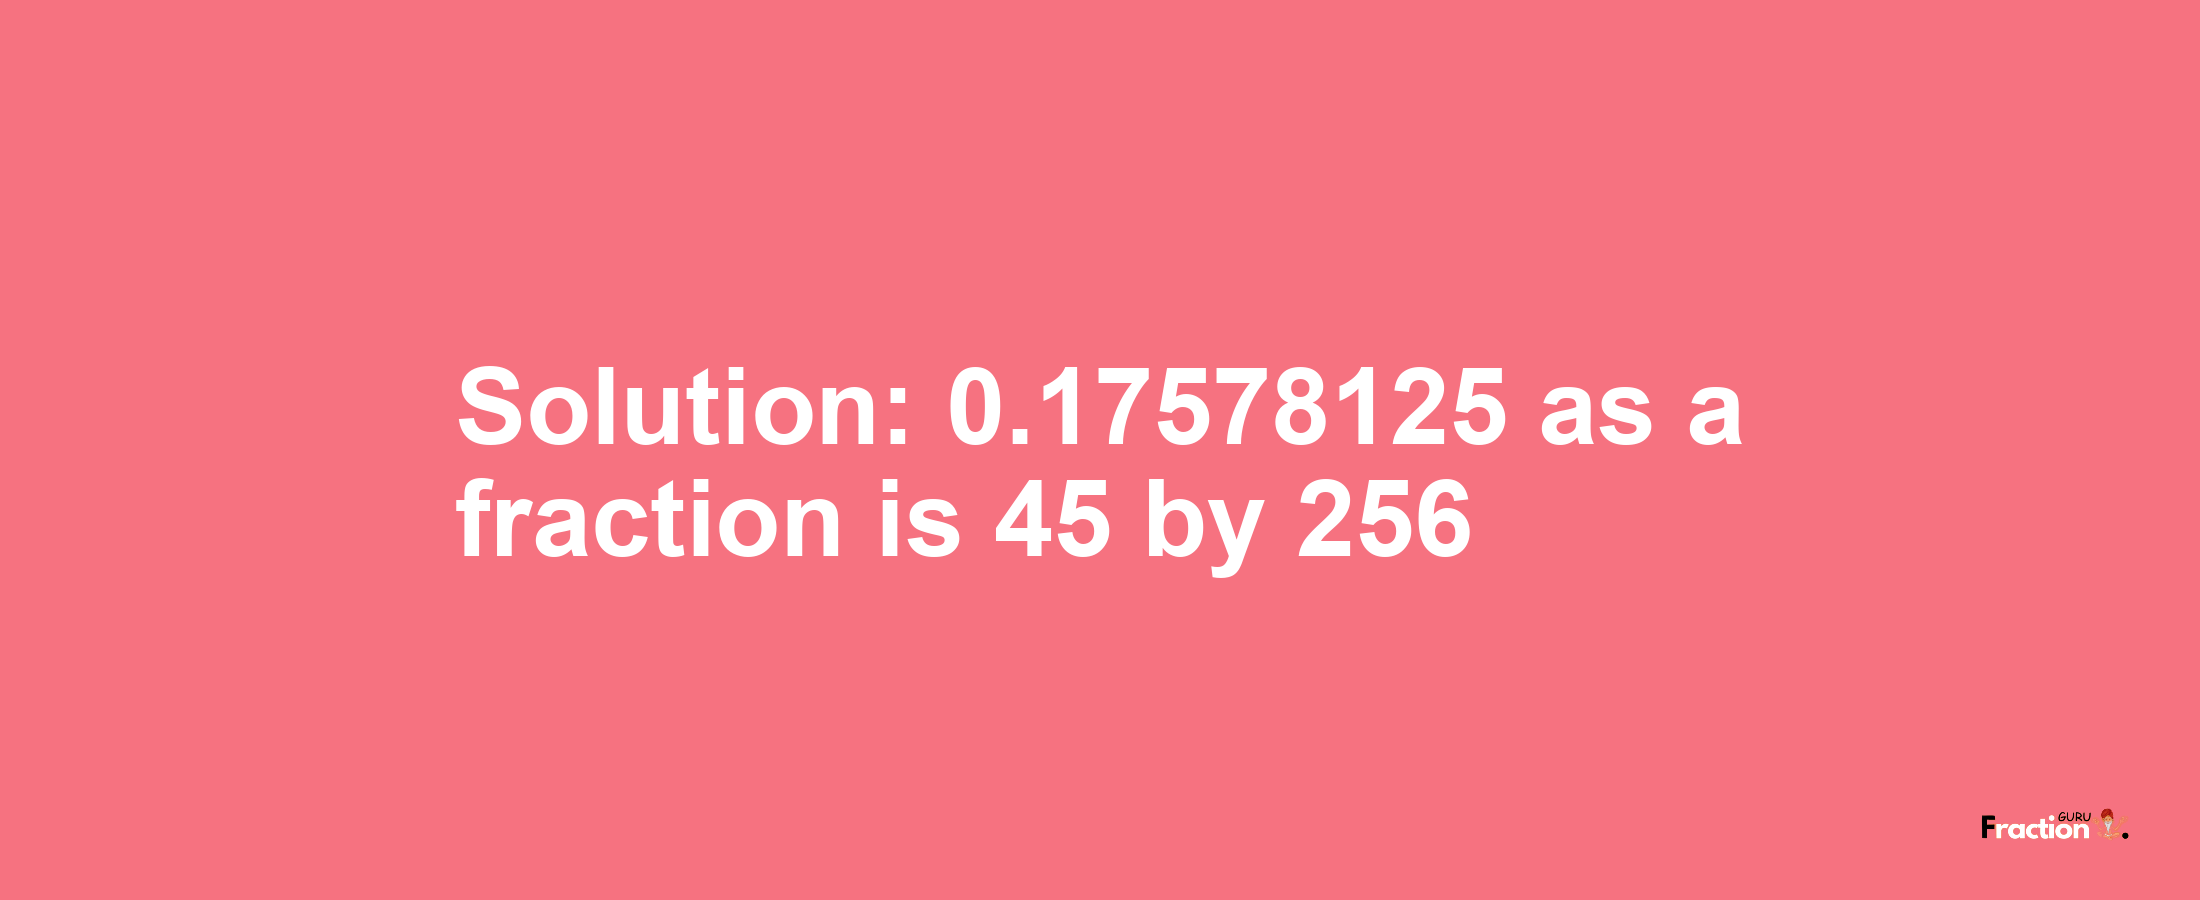 Solution:0.17578125 as a fraction is 45/256